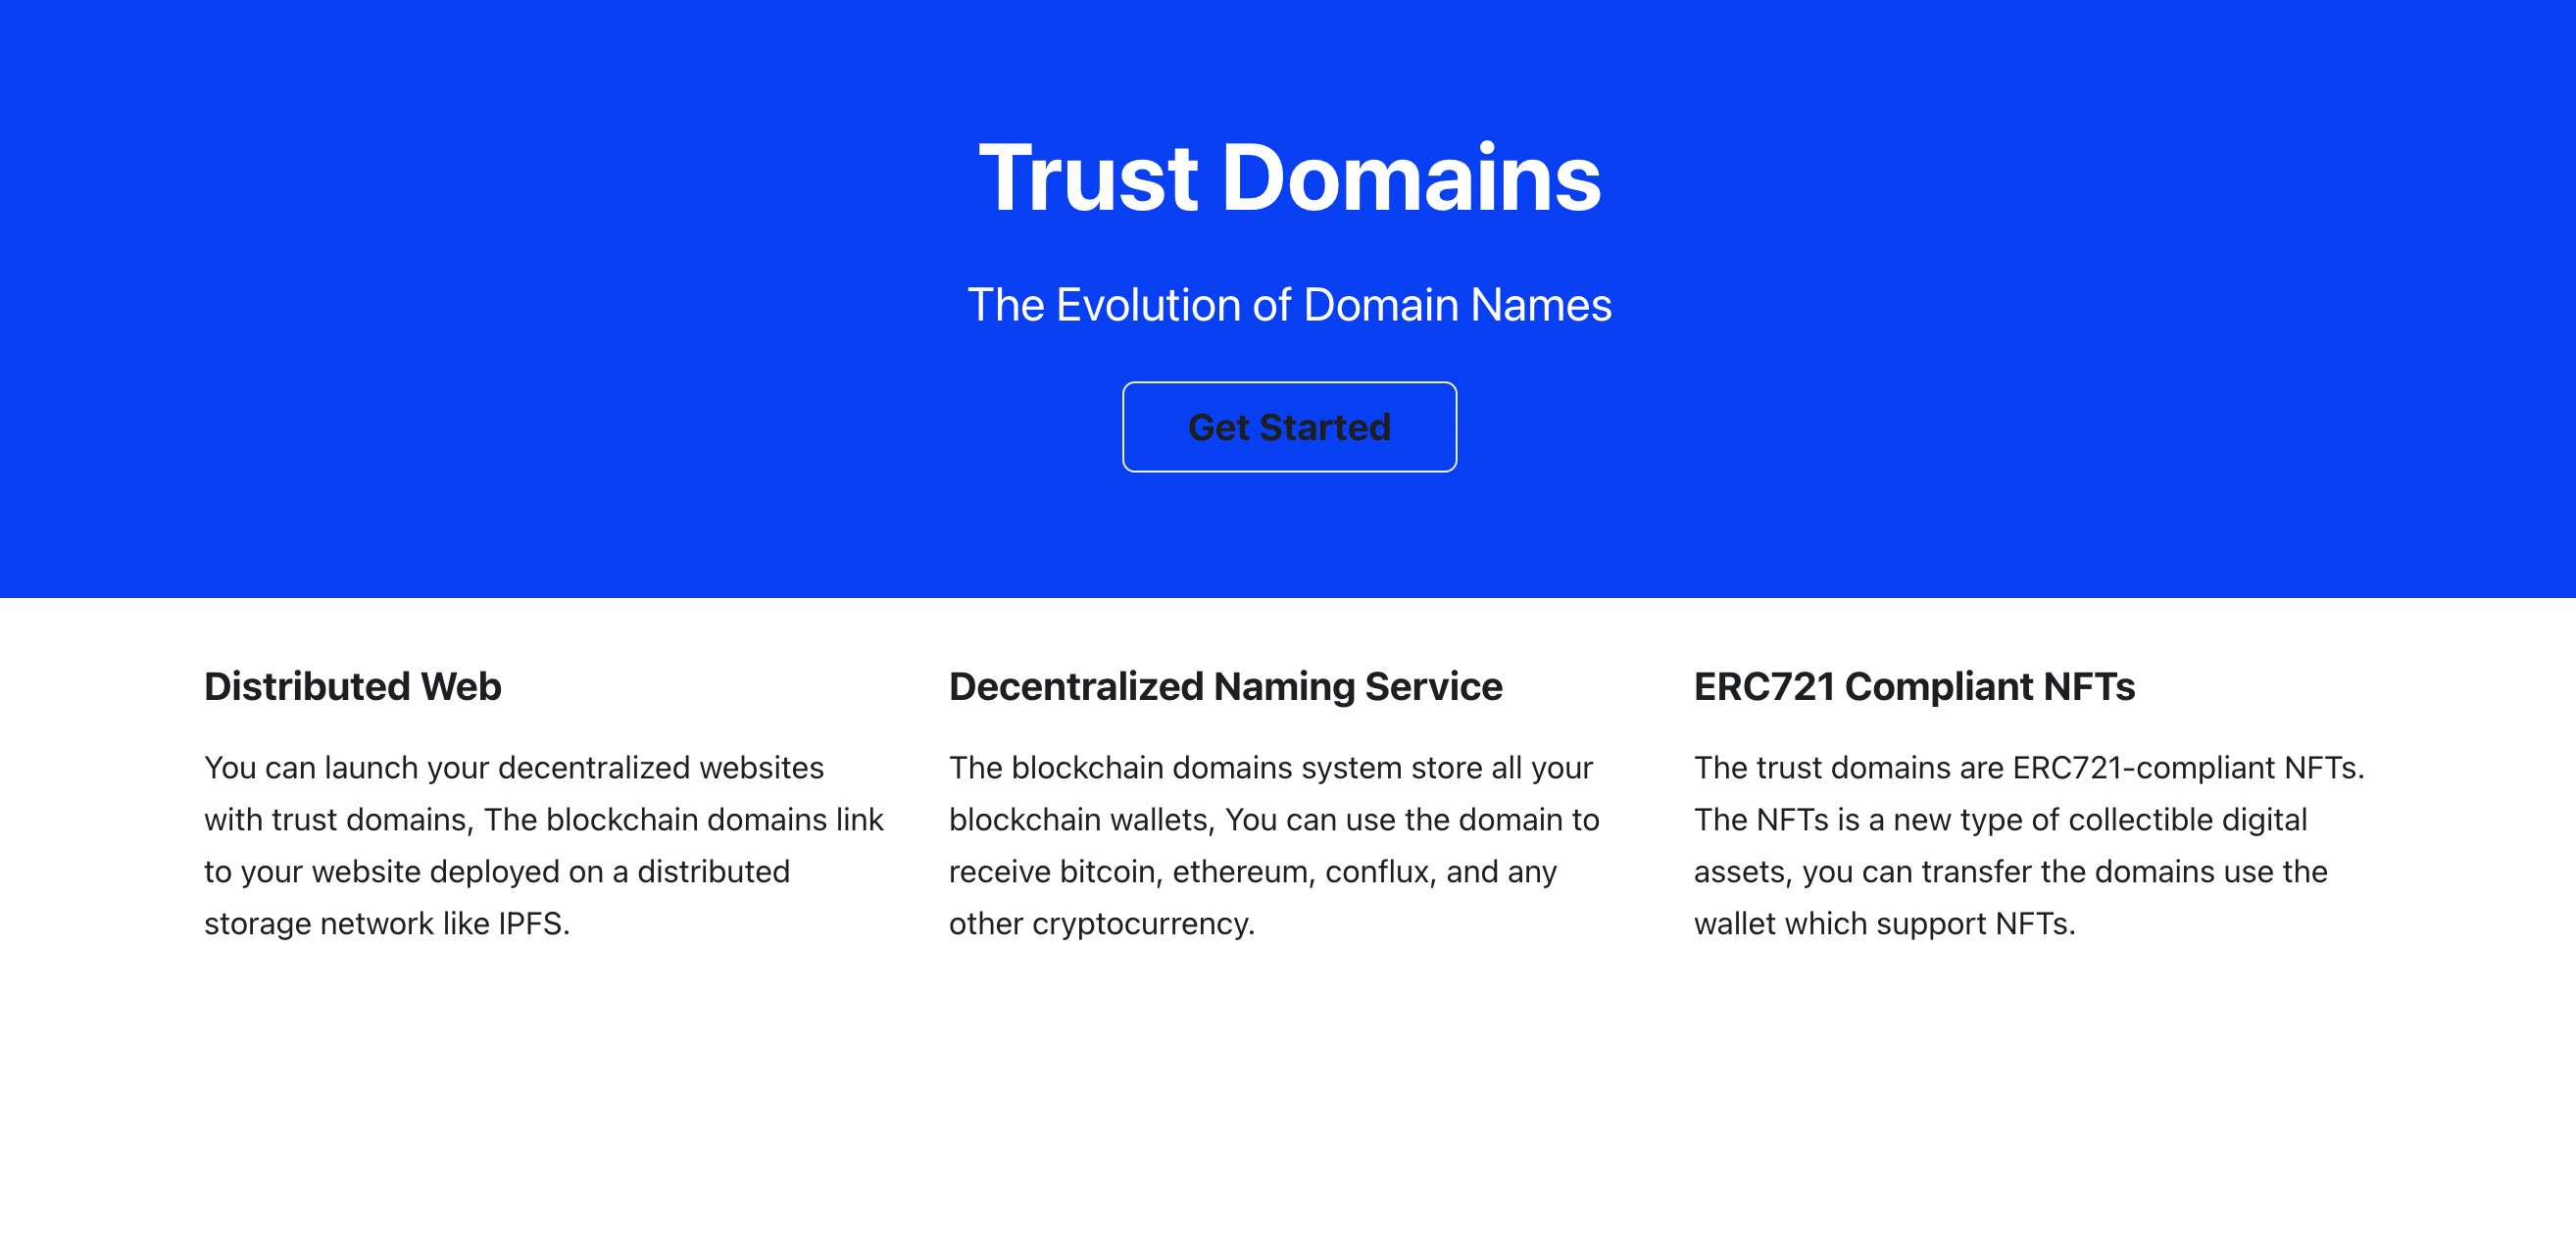 Trust Domains cover